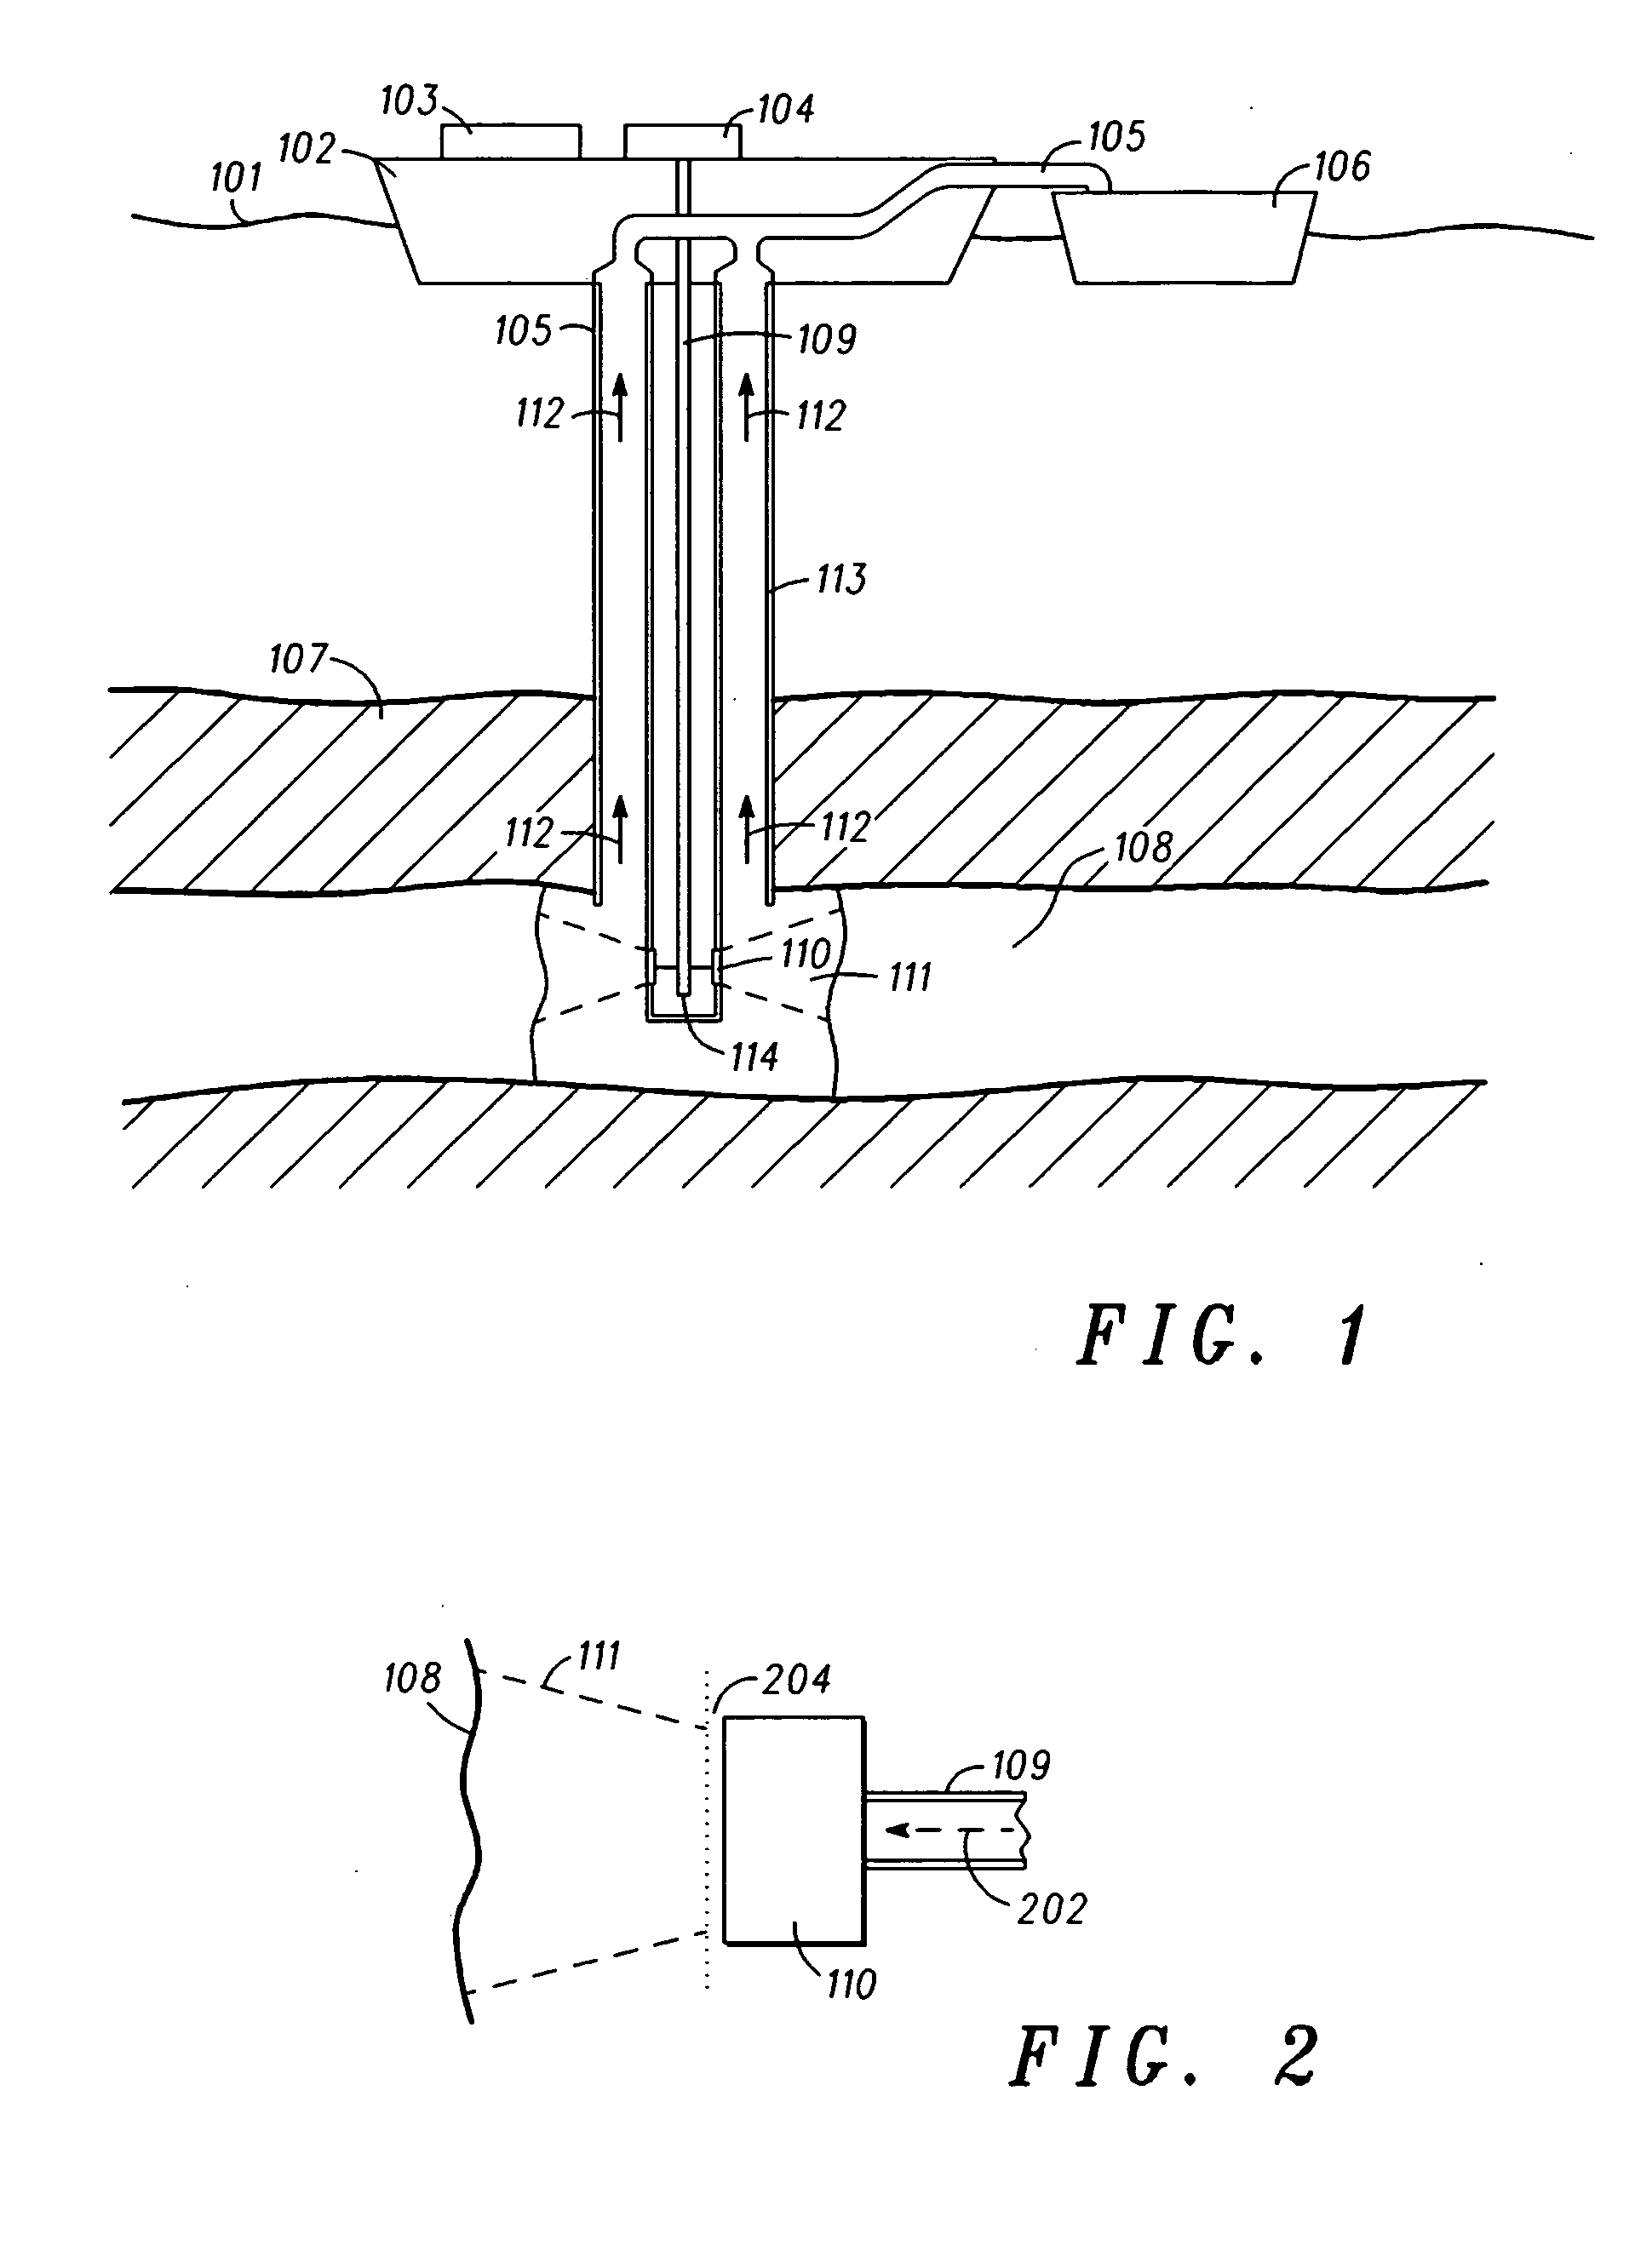 Methane extraction method and apparatus using high-energy diode lasers or diode-pumped solid state lasers